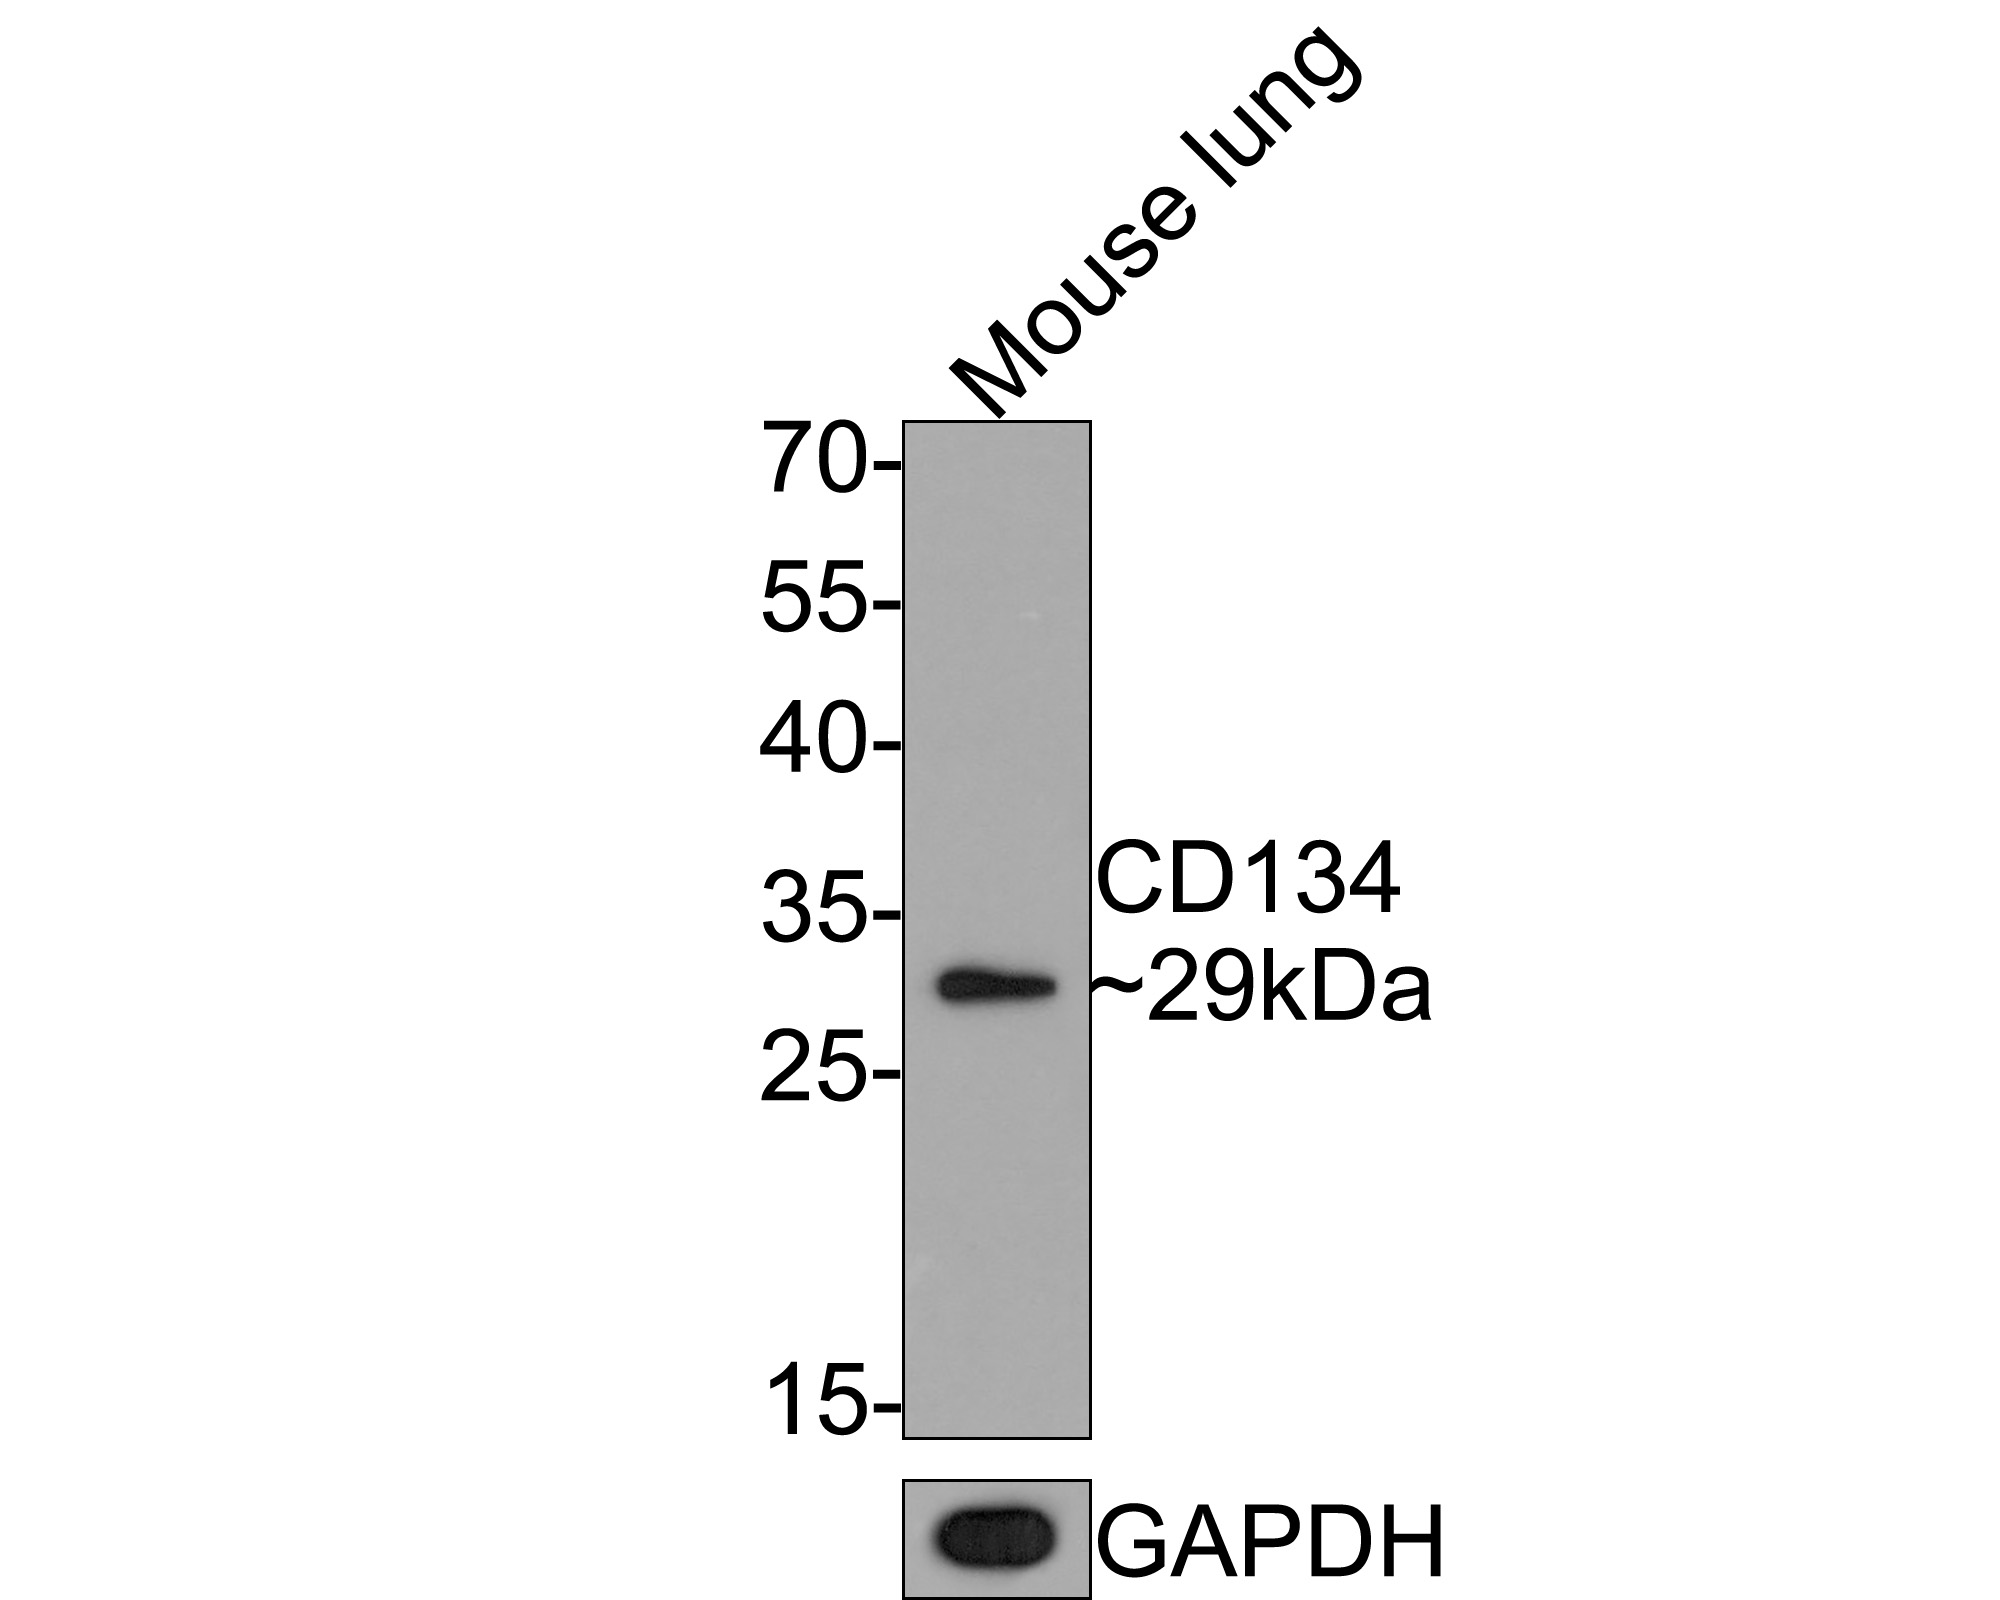 Western blot analysis of CD134/OX40 on mouse lung tissue lysates with Mouse anti-CD134/OX40 antibody (EM1701-24) at 1/500 dilution.<br />
<br />
Lysates/proteins at 20 µg/Lane.<br />
<br />
Predicted band size: 29 kDa<br />
Observed band size: 29  kDa<br />
<br />
Exposure time: 2 minutes;<br />
<br />
12% SDS-PAGE gel.<br />
<br />
Proteins were transferred to a PVDF membrane and blocked with 5% NFDM/TBST for 1 hour at room temperature. The primary antibody (EM1701-24) at 1/500 dilution was used in 5% NFDM/TBST at room temperature for 2 hours. Goat Anti-Mouse IgG - HRP Secondary Antibody (HA1006) at 1:100,000 dilution was used for 1 hour at room temperature.